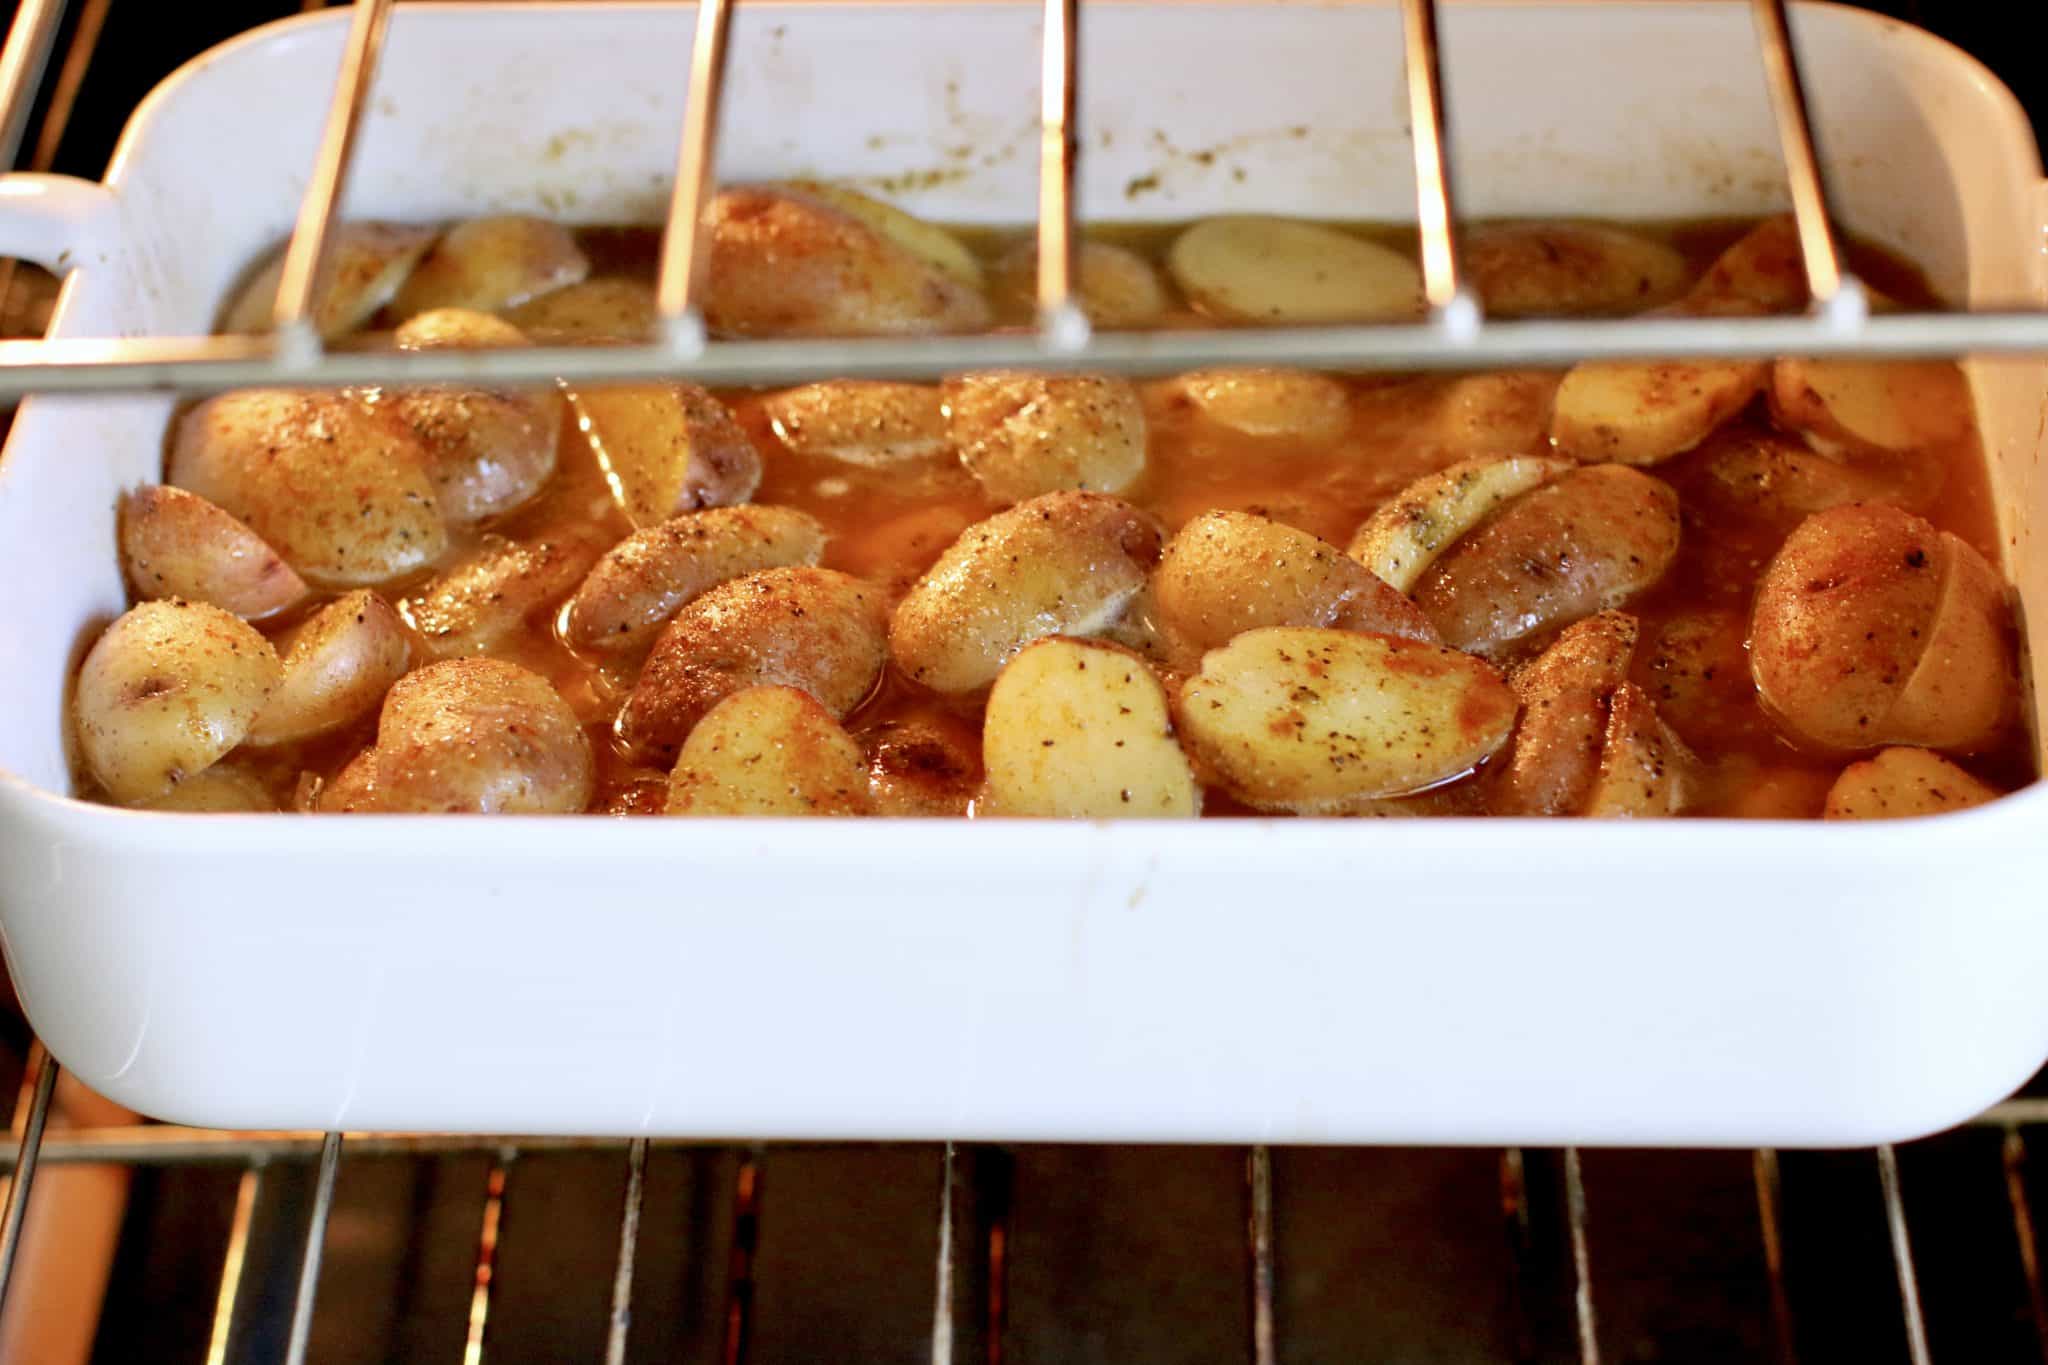 cooked Greek potatoes shown in a baking dish inside the oven.